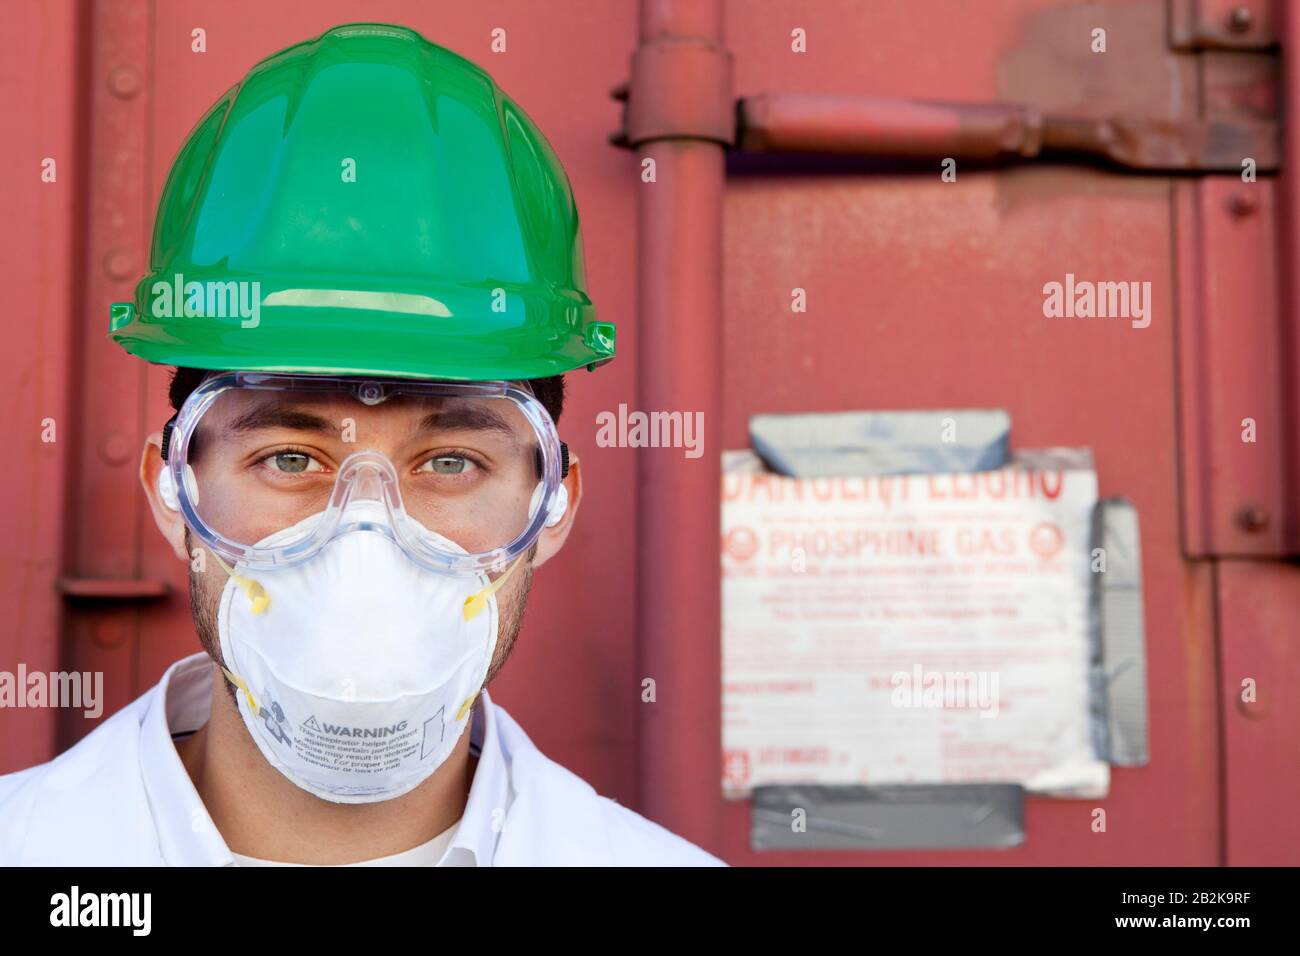 Worker in hazmat suit, hard-hat and face mask Stock Photo